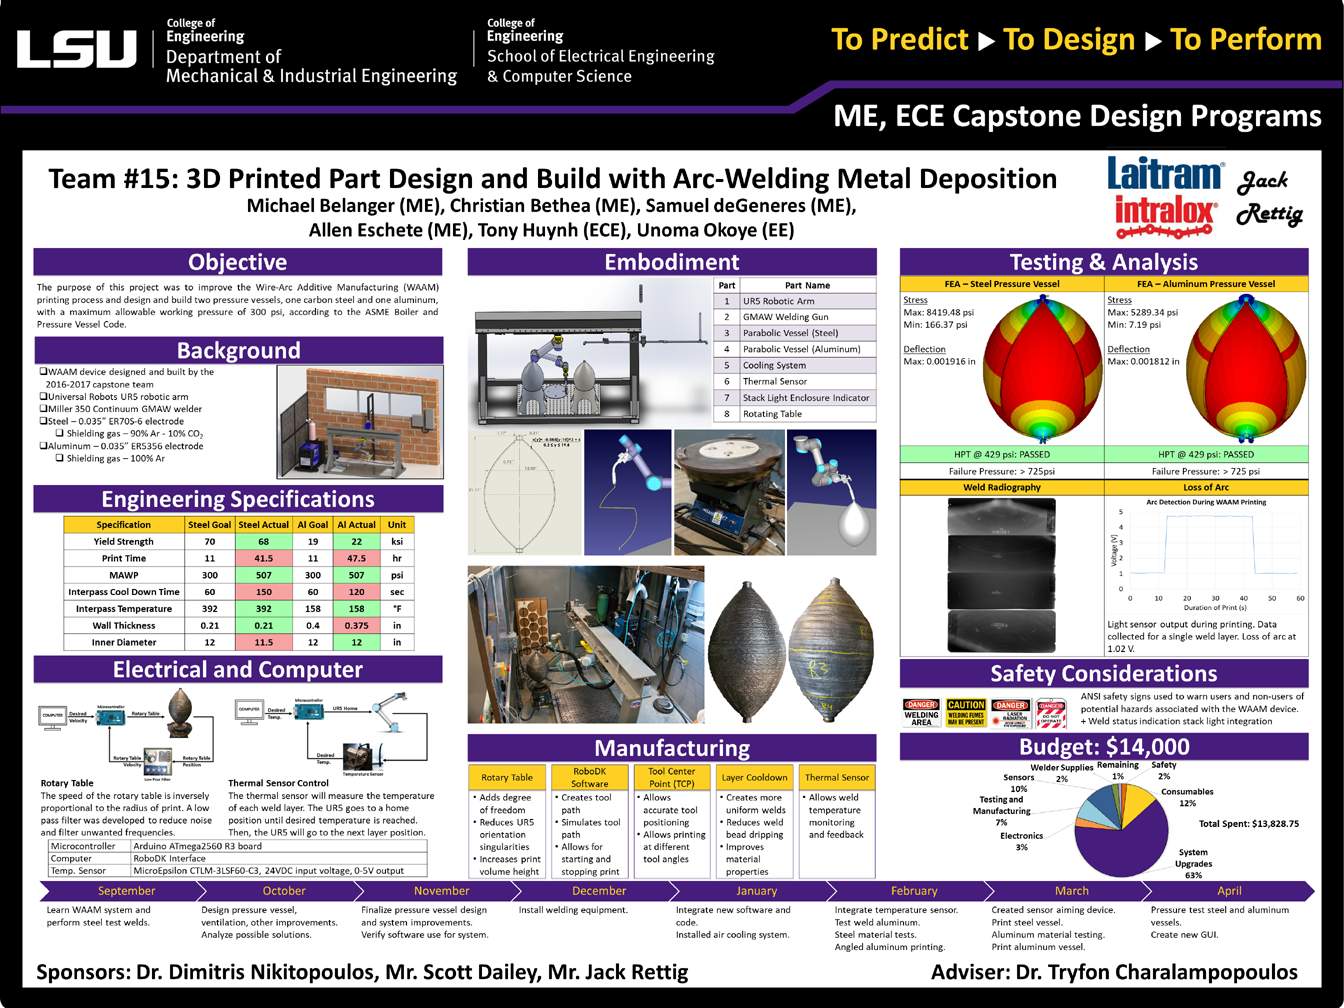 Project 15: 3D-Printed Part Design and Build with Arc-Welding Metal Deposition (2019)